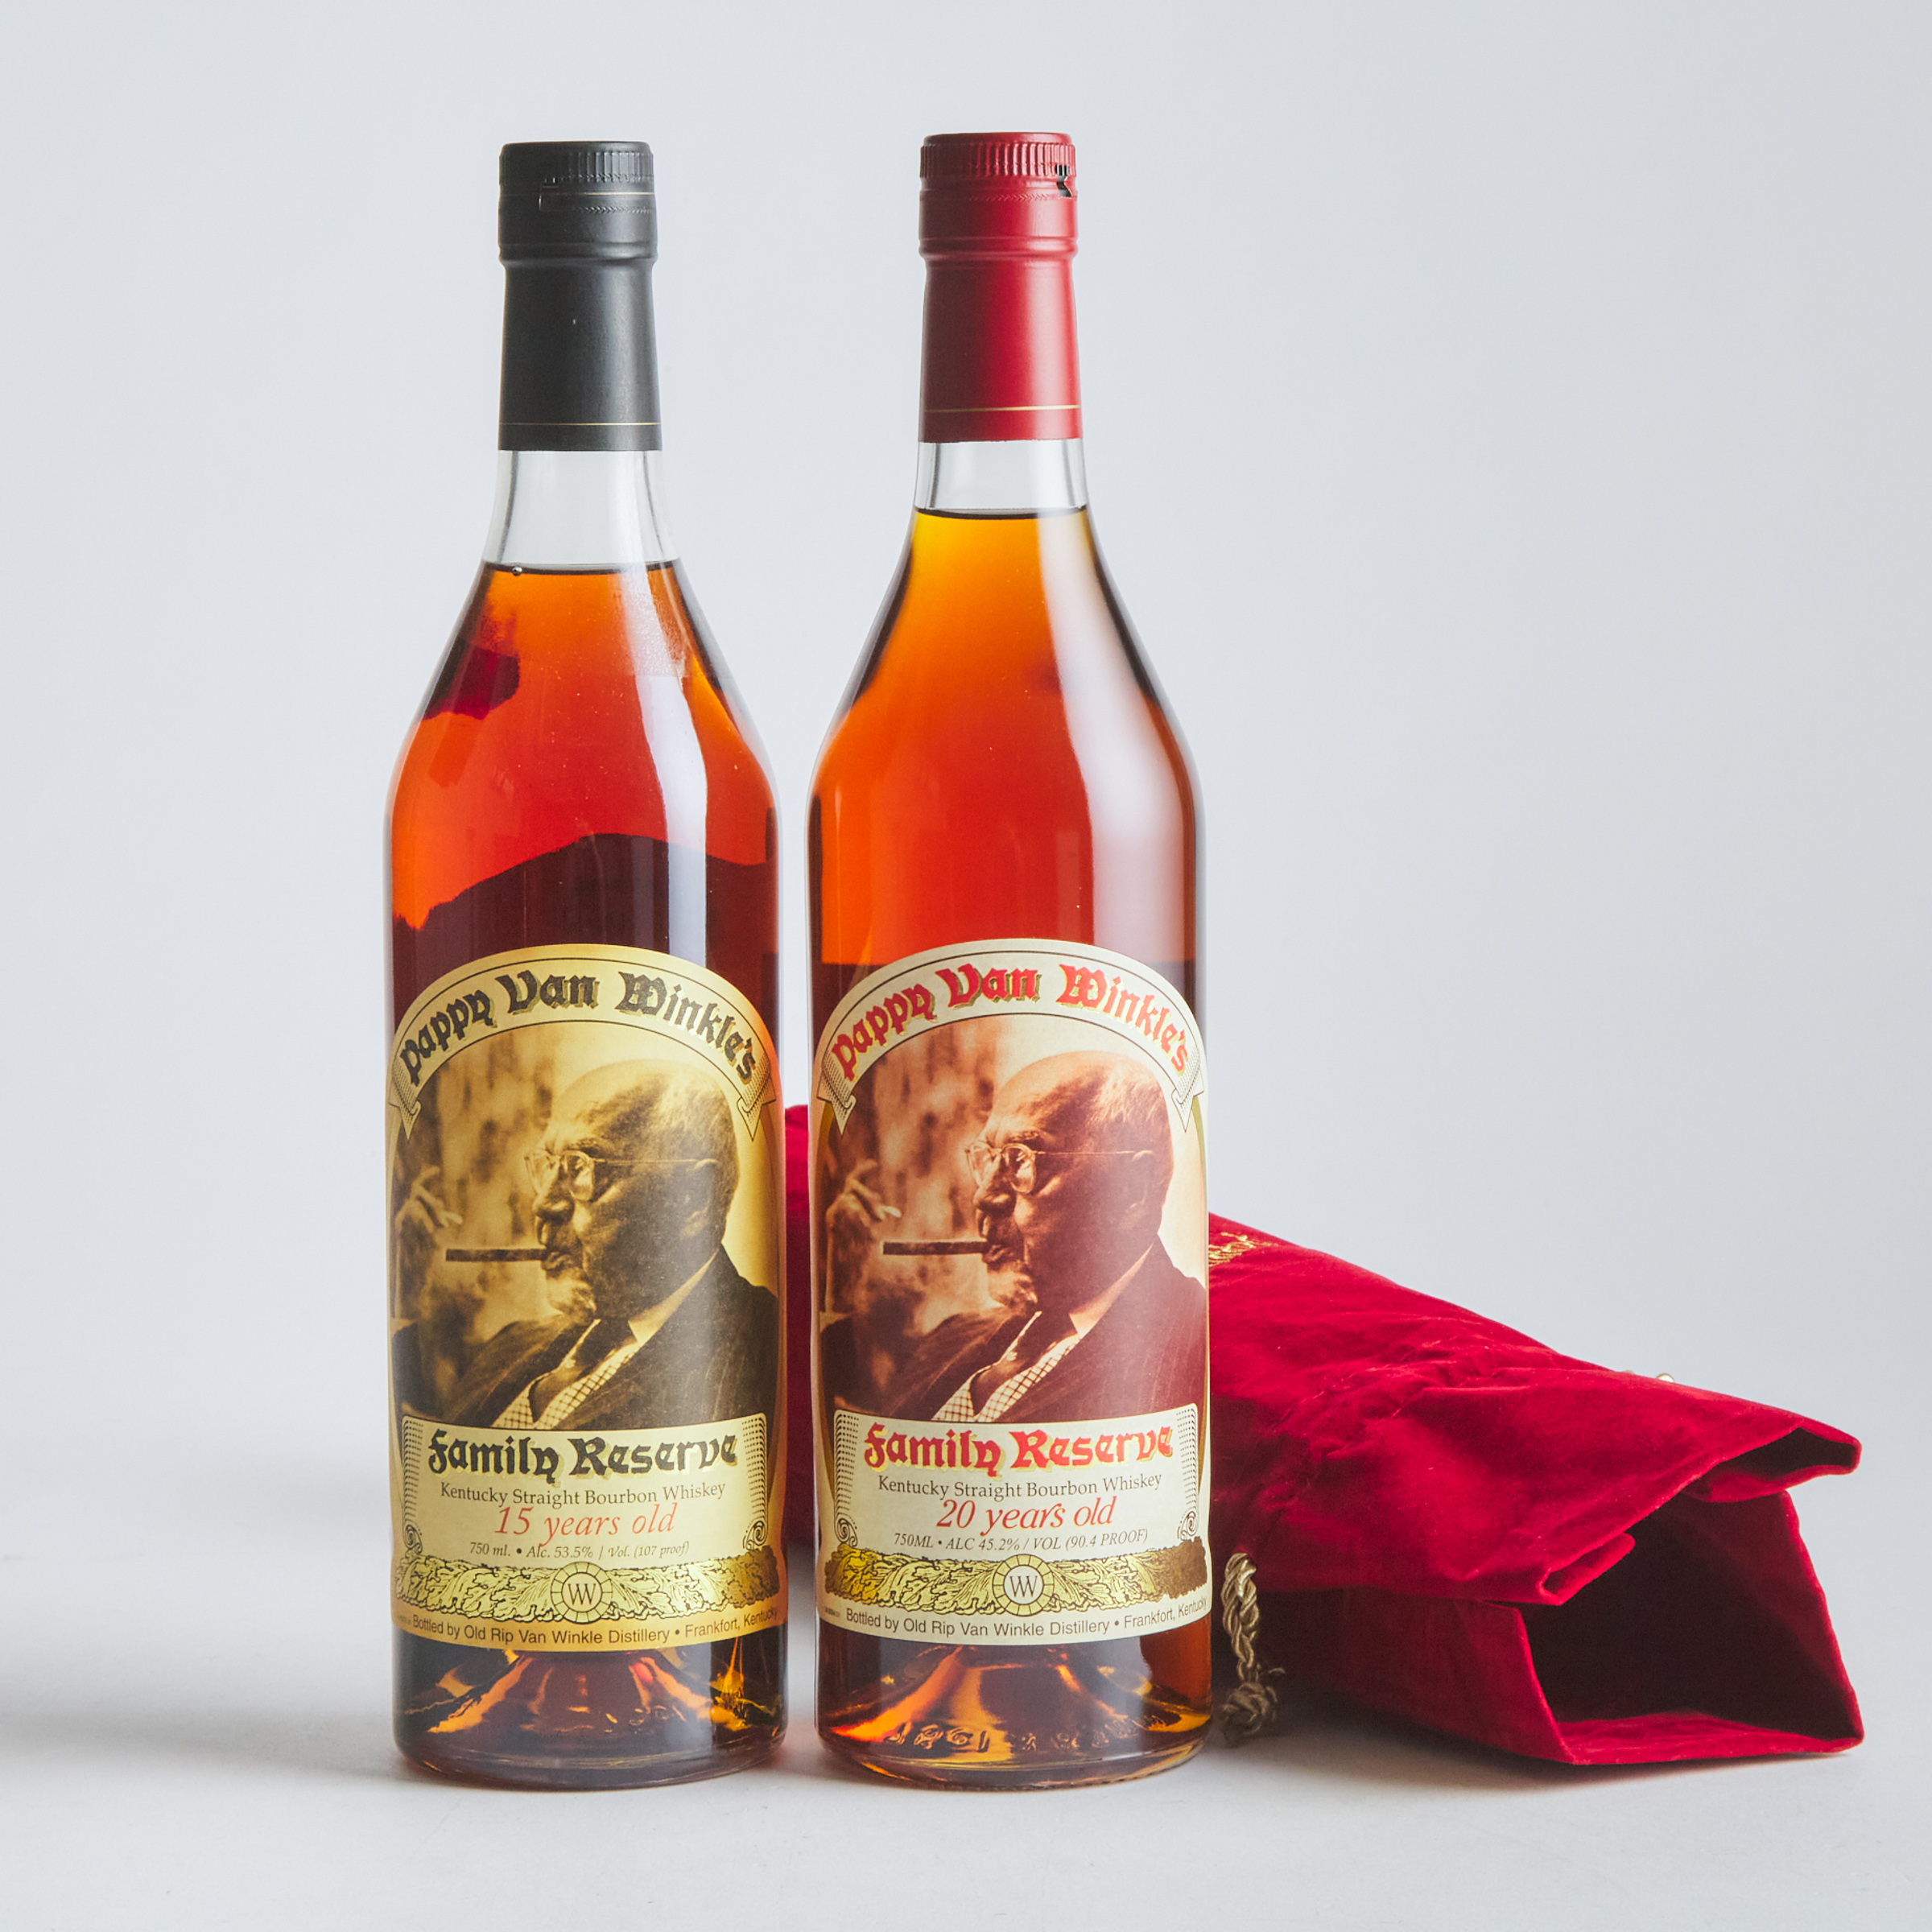 PAPPY VAN WINKLE FAMILY RESERVE KENTUCKY STRAIGHT BOURBON WHISKEY 20 YEARS (ONE 750 ML)
PAPPY VAN WINKLE FAMILY RESERVE KENTUCKY STRAIGHT BOURBON WHISKEY 15 YEARS (ONE 750 ML)